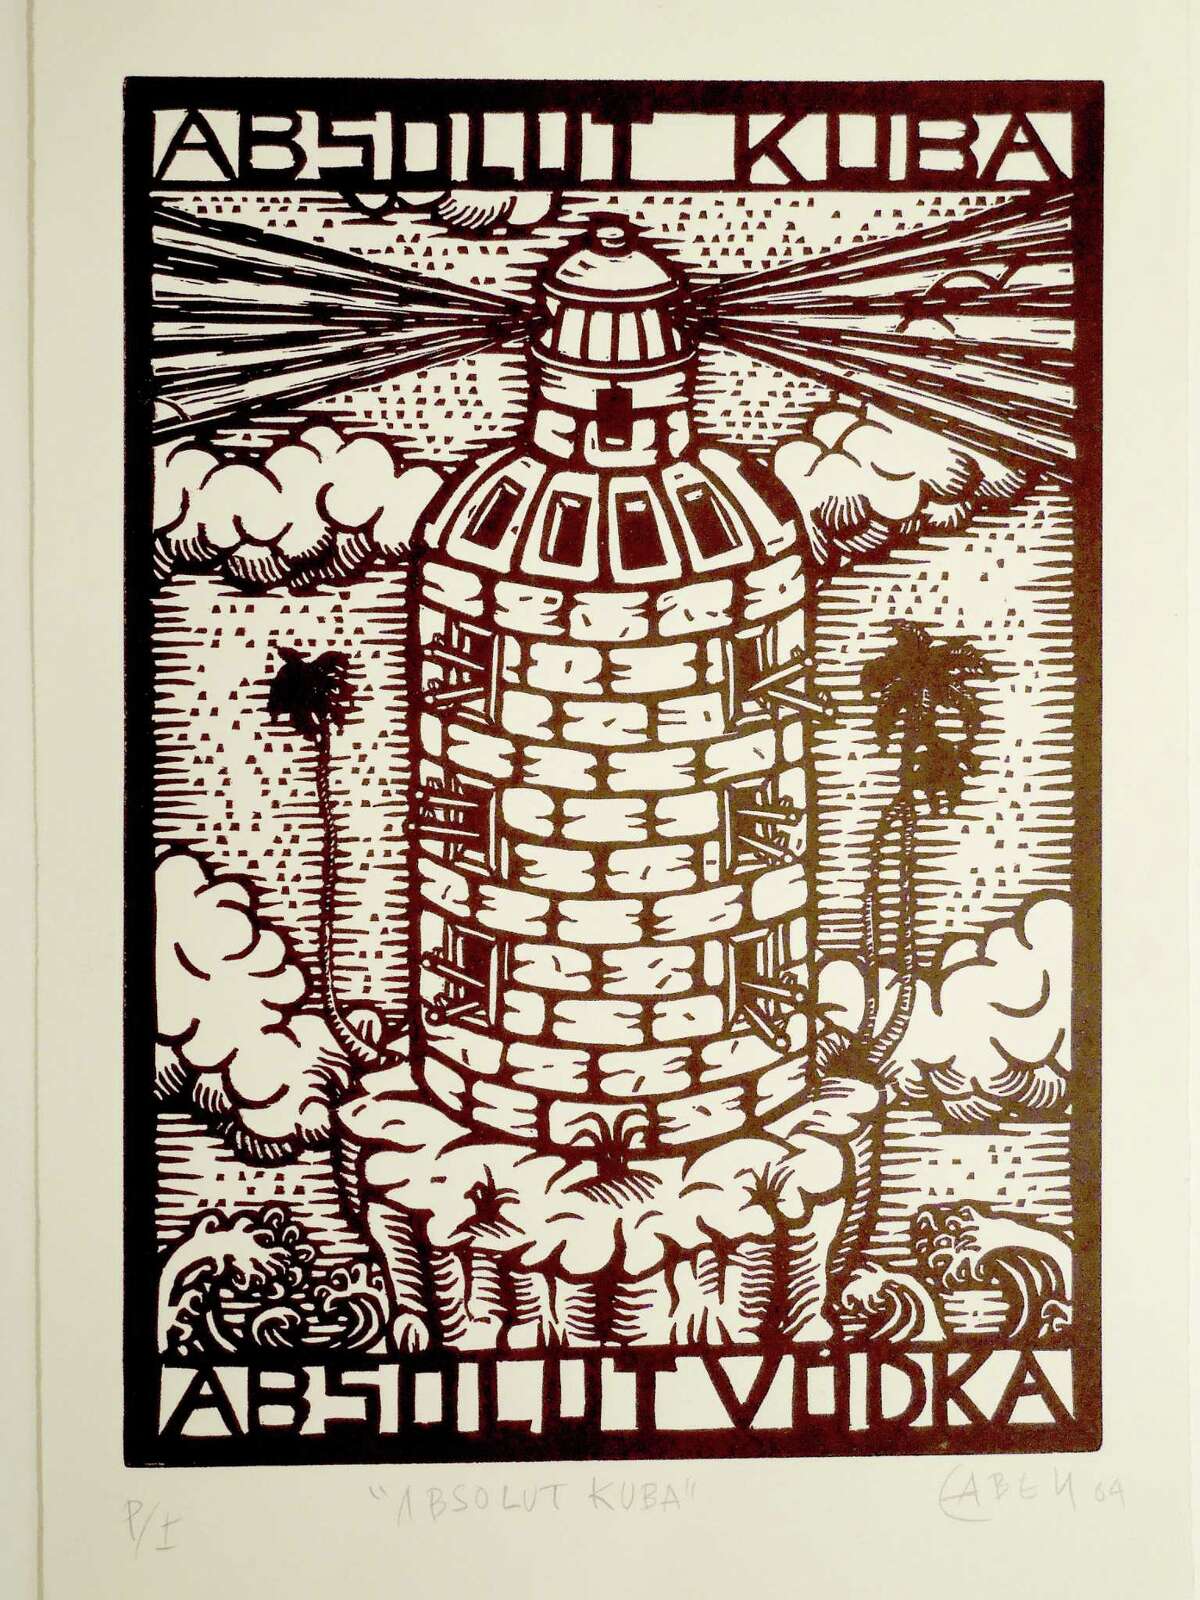 Eduardo Miguel Abela Torras, whose "Absolut Kuba," a linoleum cut, will be among the pieces on display at a new exhibiton at the Carriage Barn Arts Center, New Canaan, beginning April 24, describes Cuba as a "country isolated by geography and under embargo from its nearest neighbor for more than 50 years, yet determined to show its strength of character."